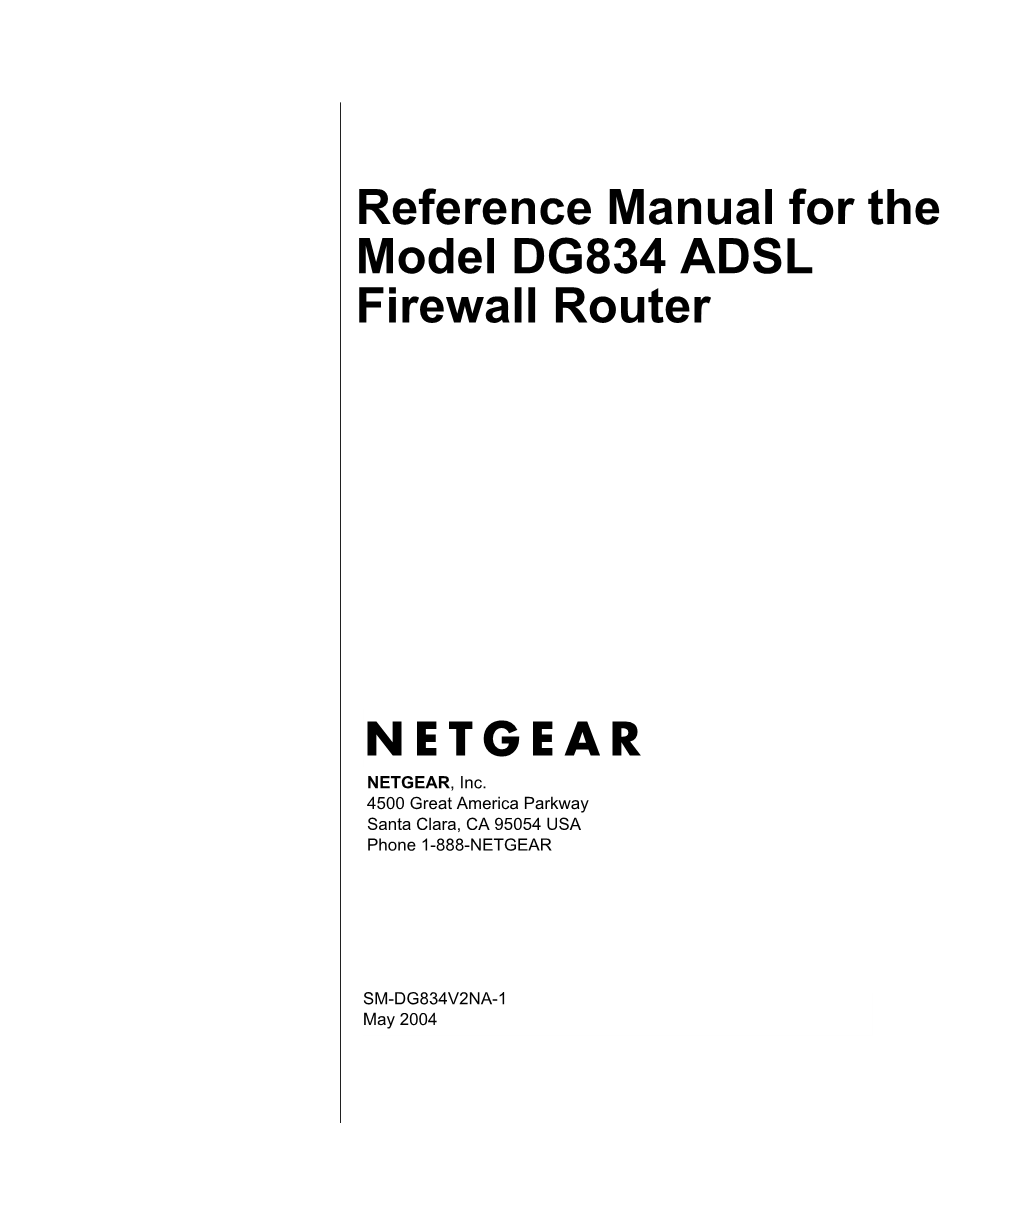 Reference Manual for the Model DG834 ADSL Firewall Router